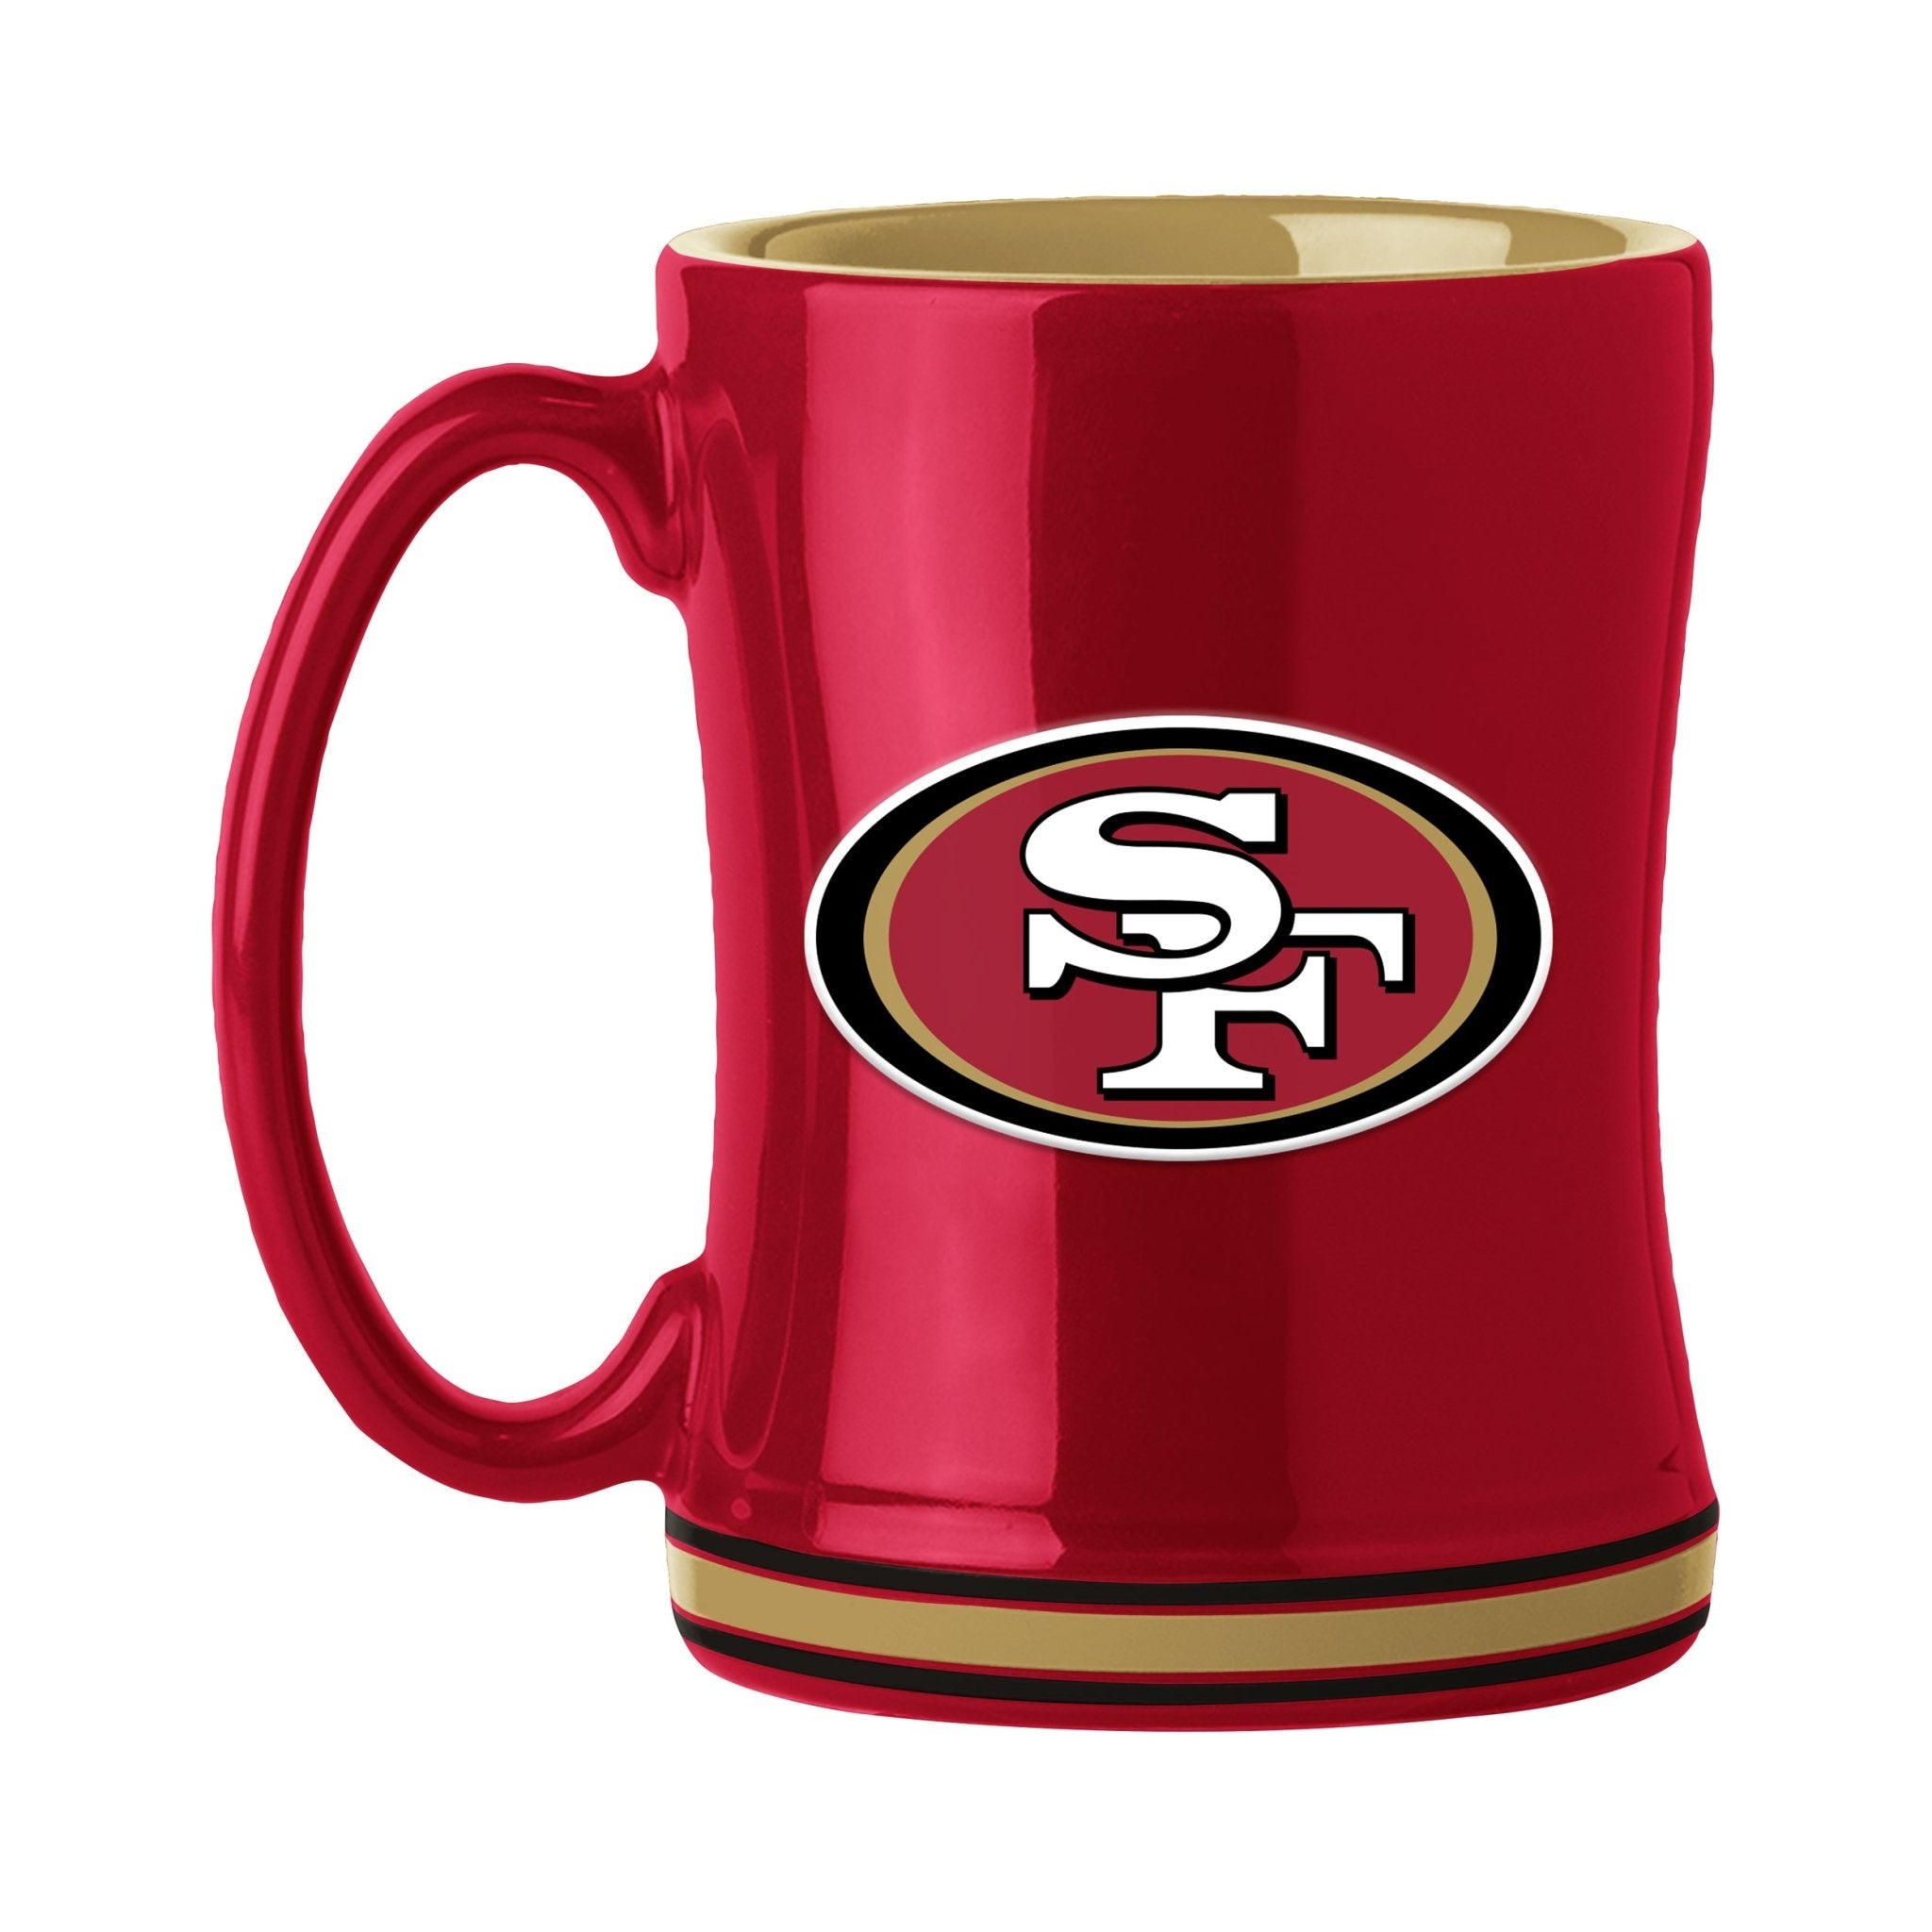 NFL 49ers Cups, Plastic Tailgate Cups